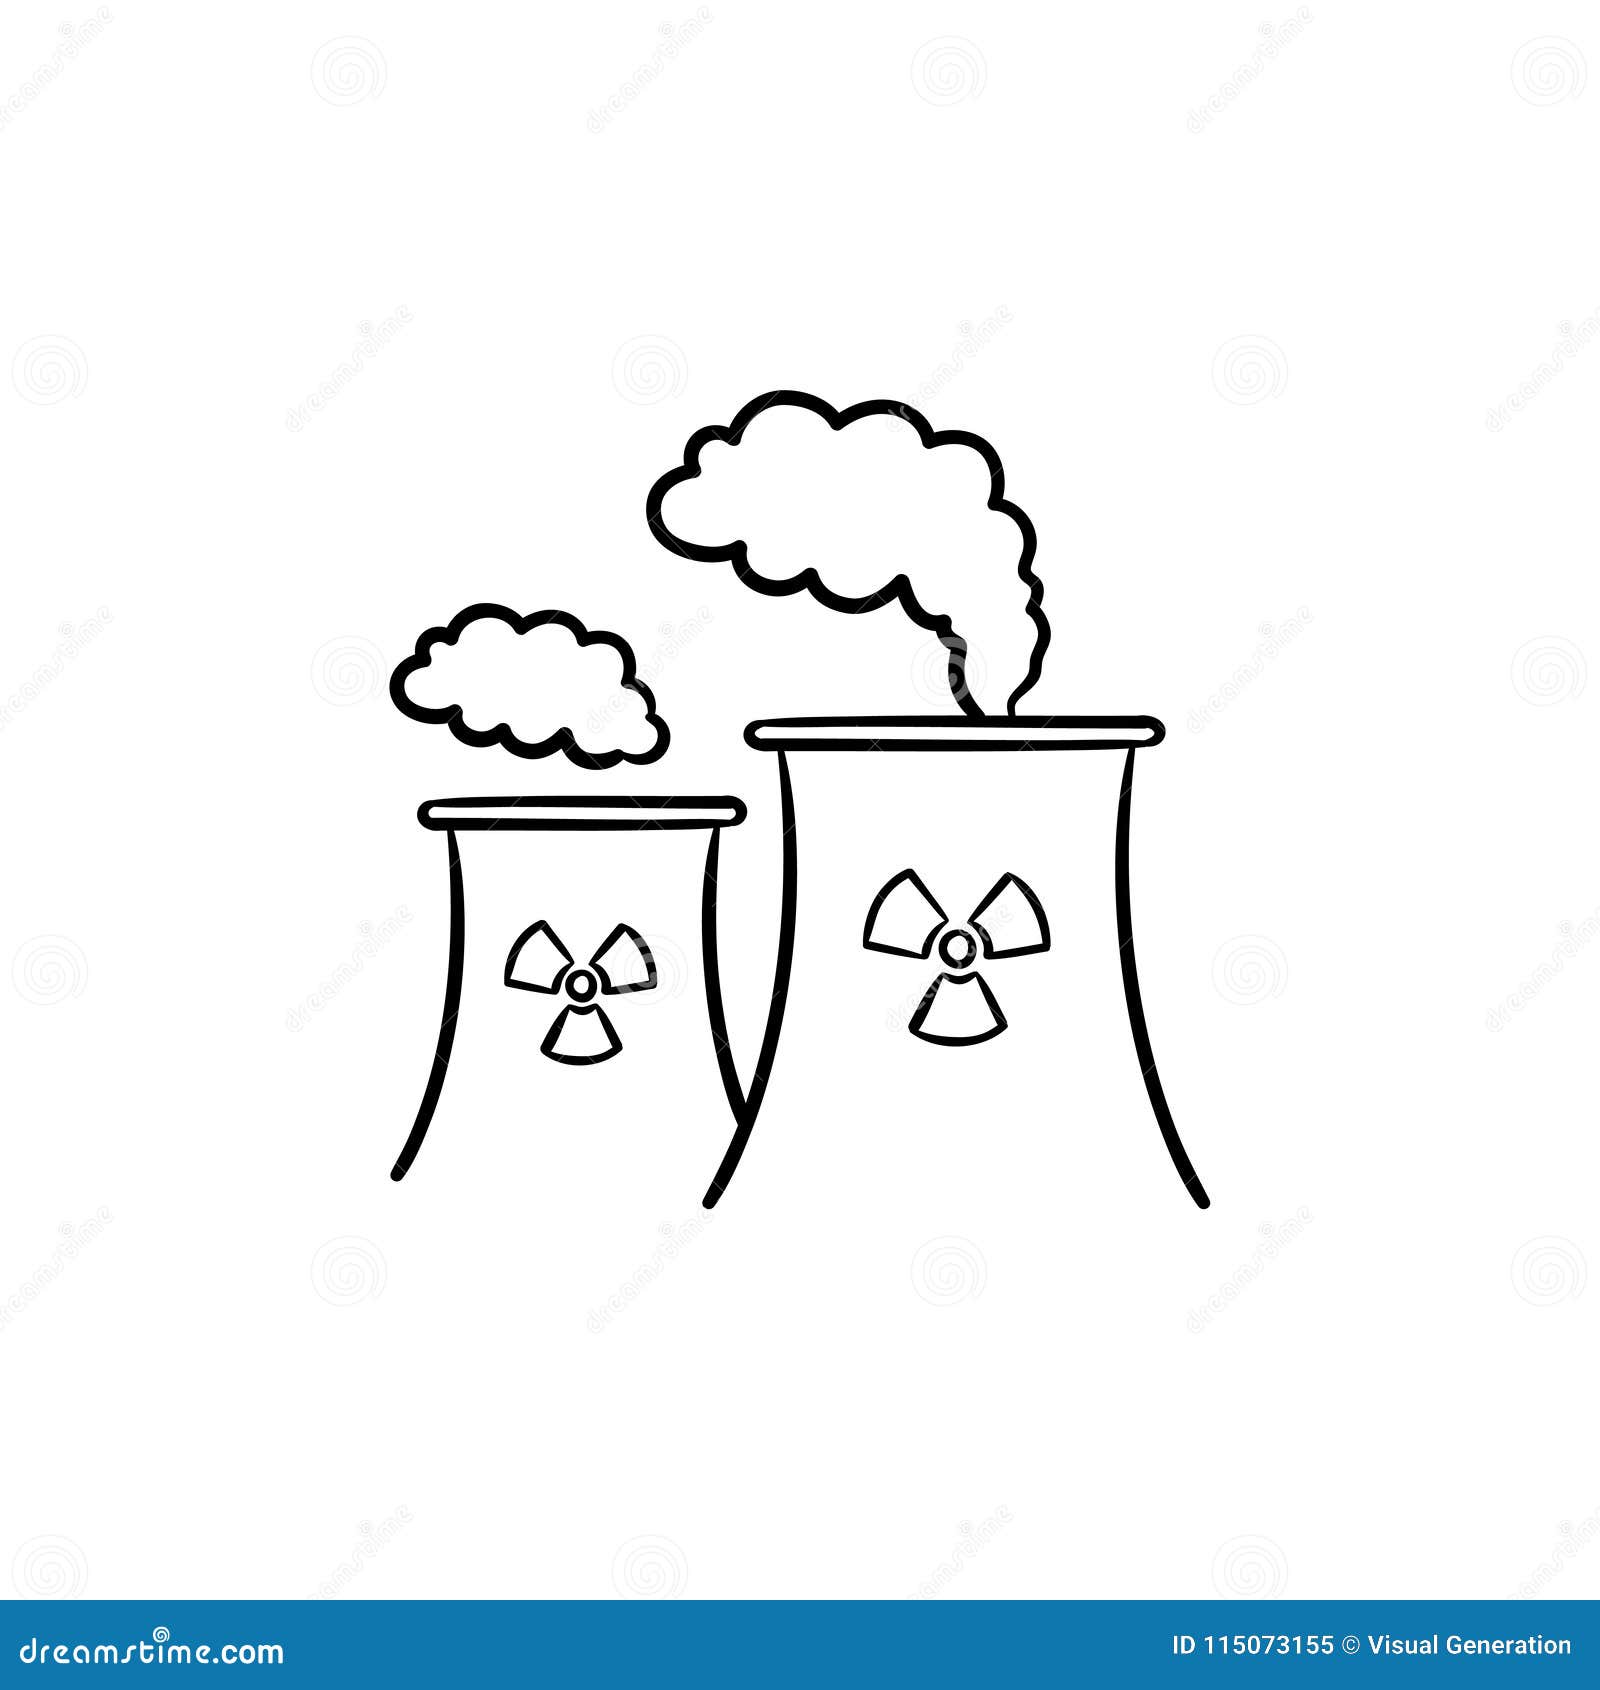 Illustration Nuclear Energy Drawing - Download Illustration 2020